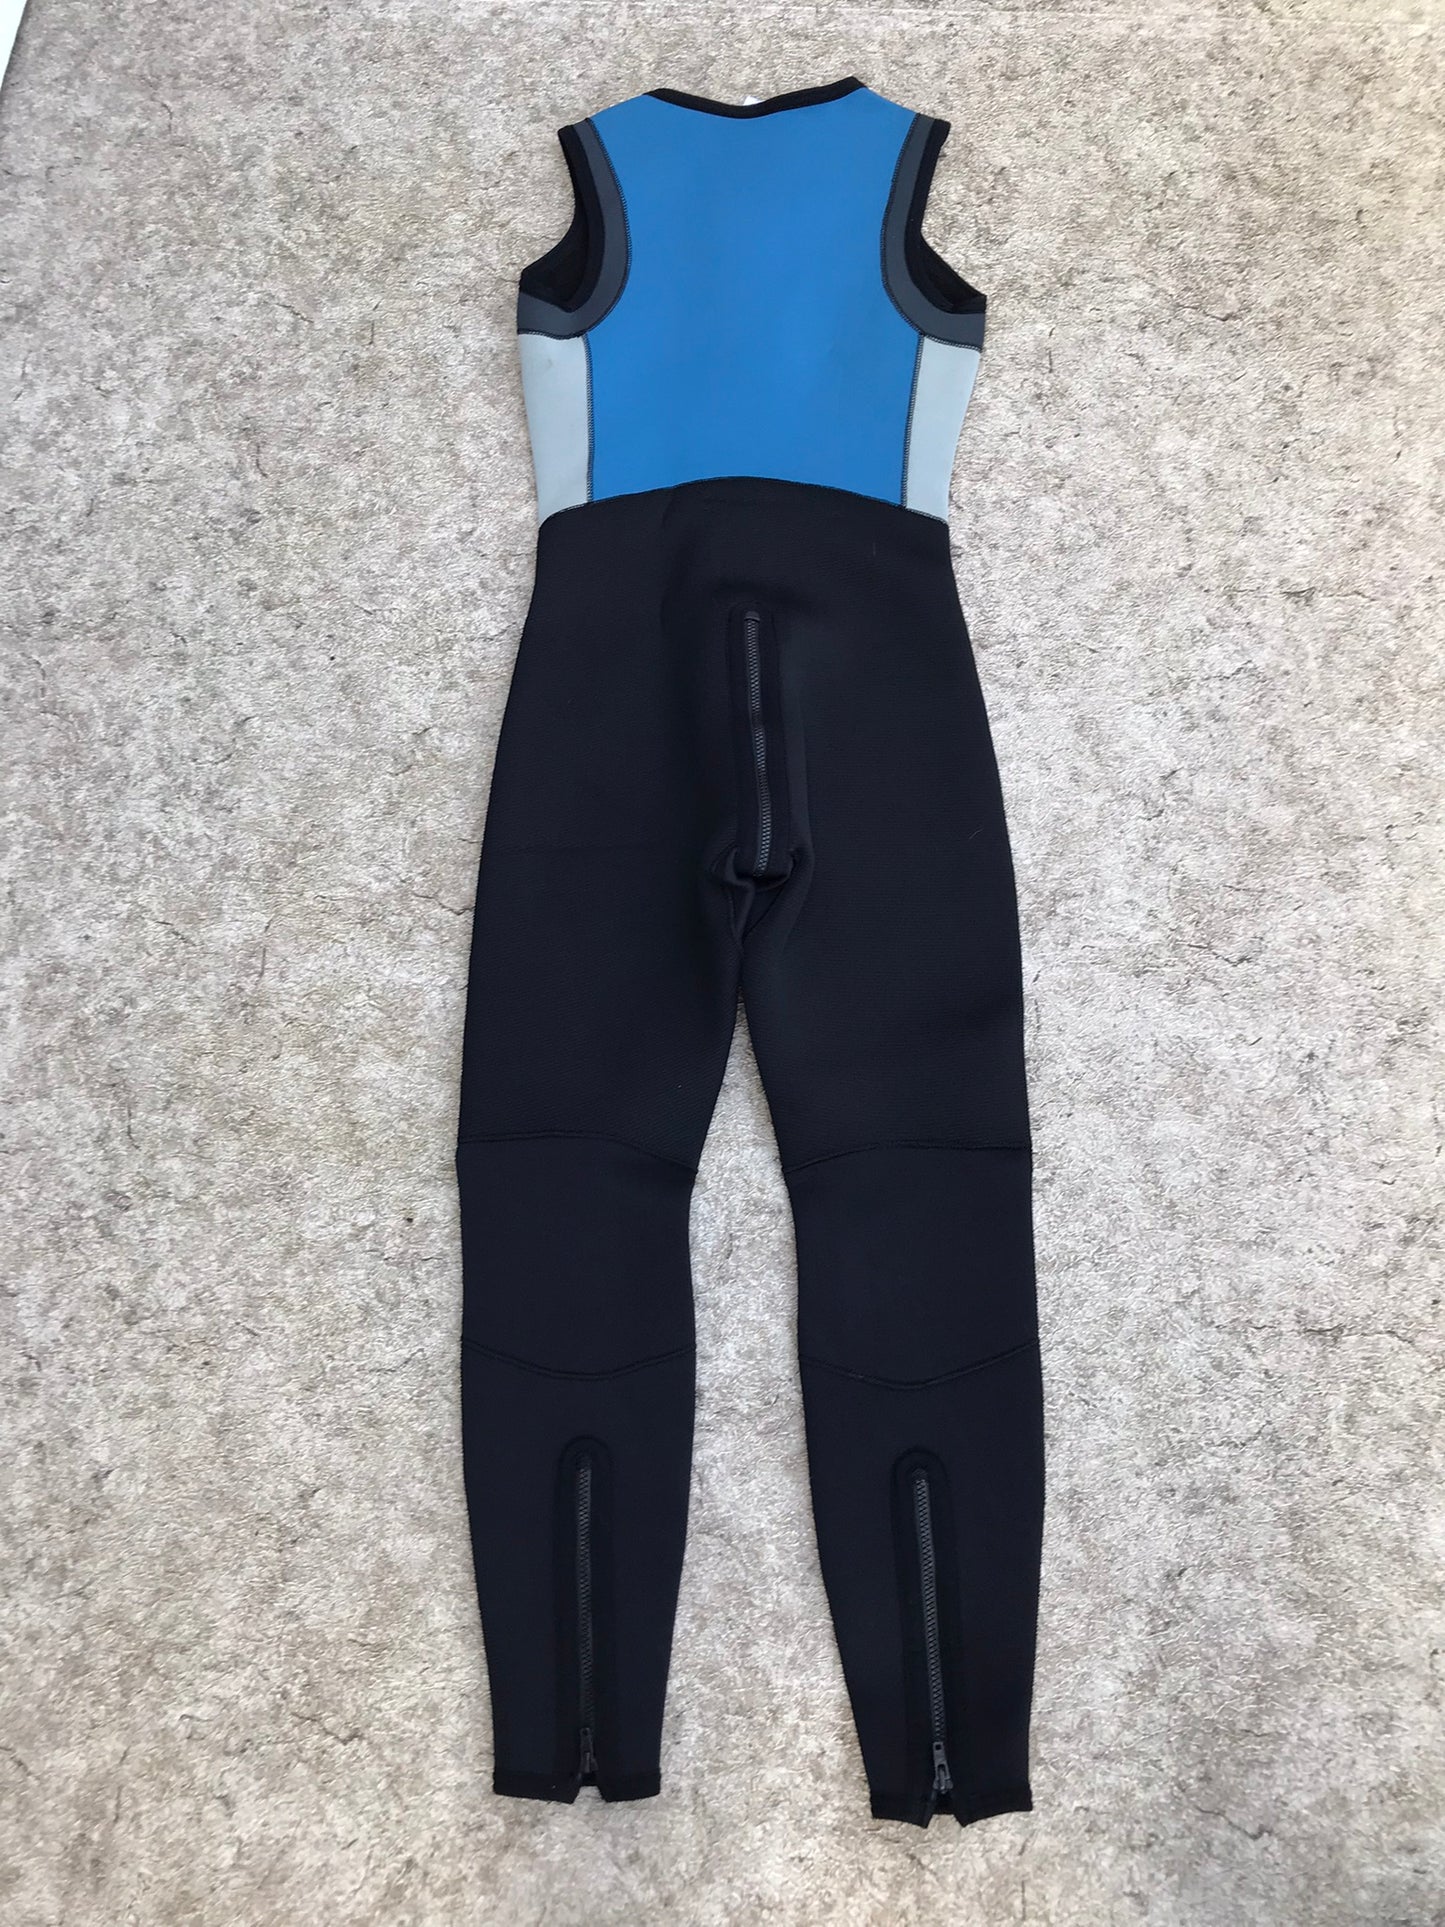 Wetsuit Ladies Size Large Full John NRS Sports 2-3 mm Black Blue With Crotch Zip Out Excellent